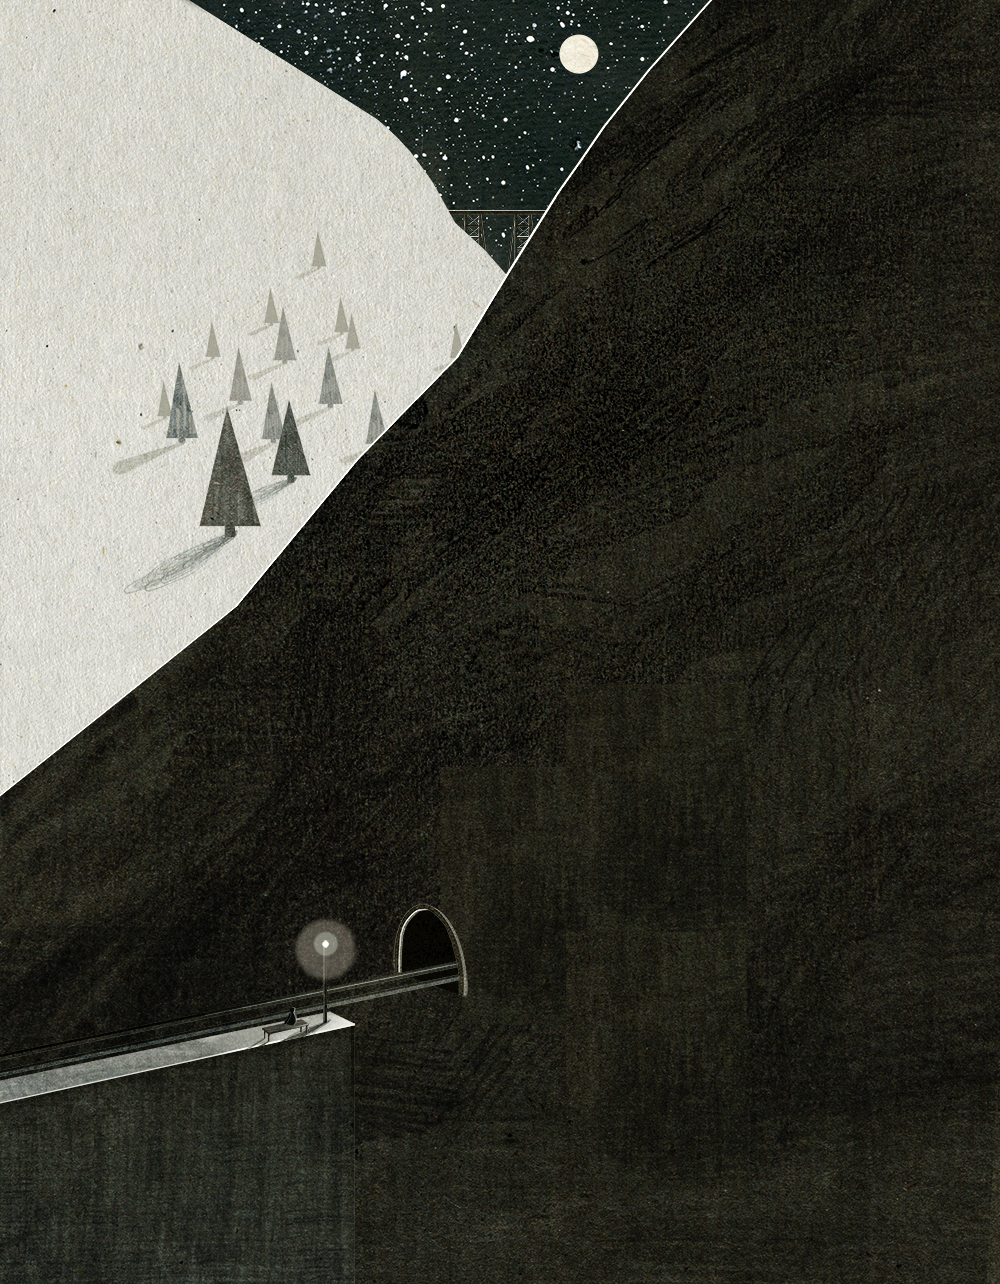 subtly animated gifs of landscape scenes by nancy liang moon medium